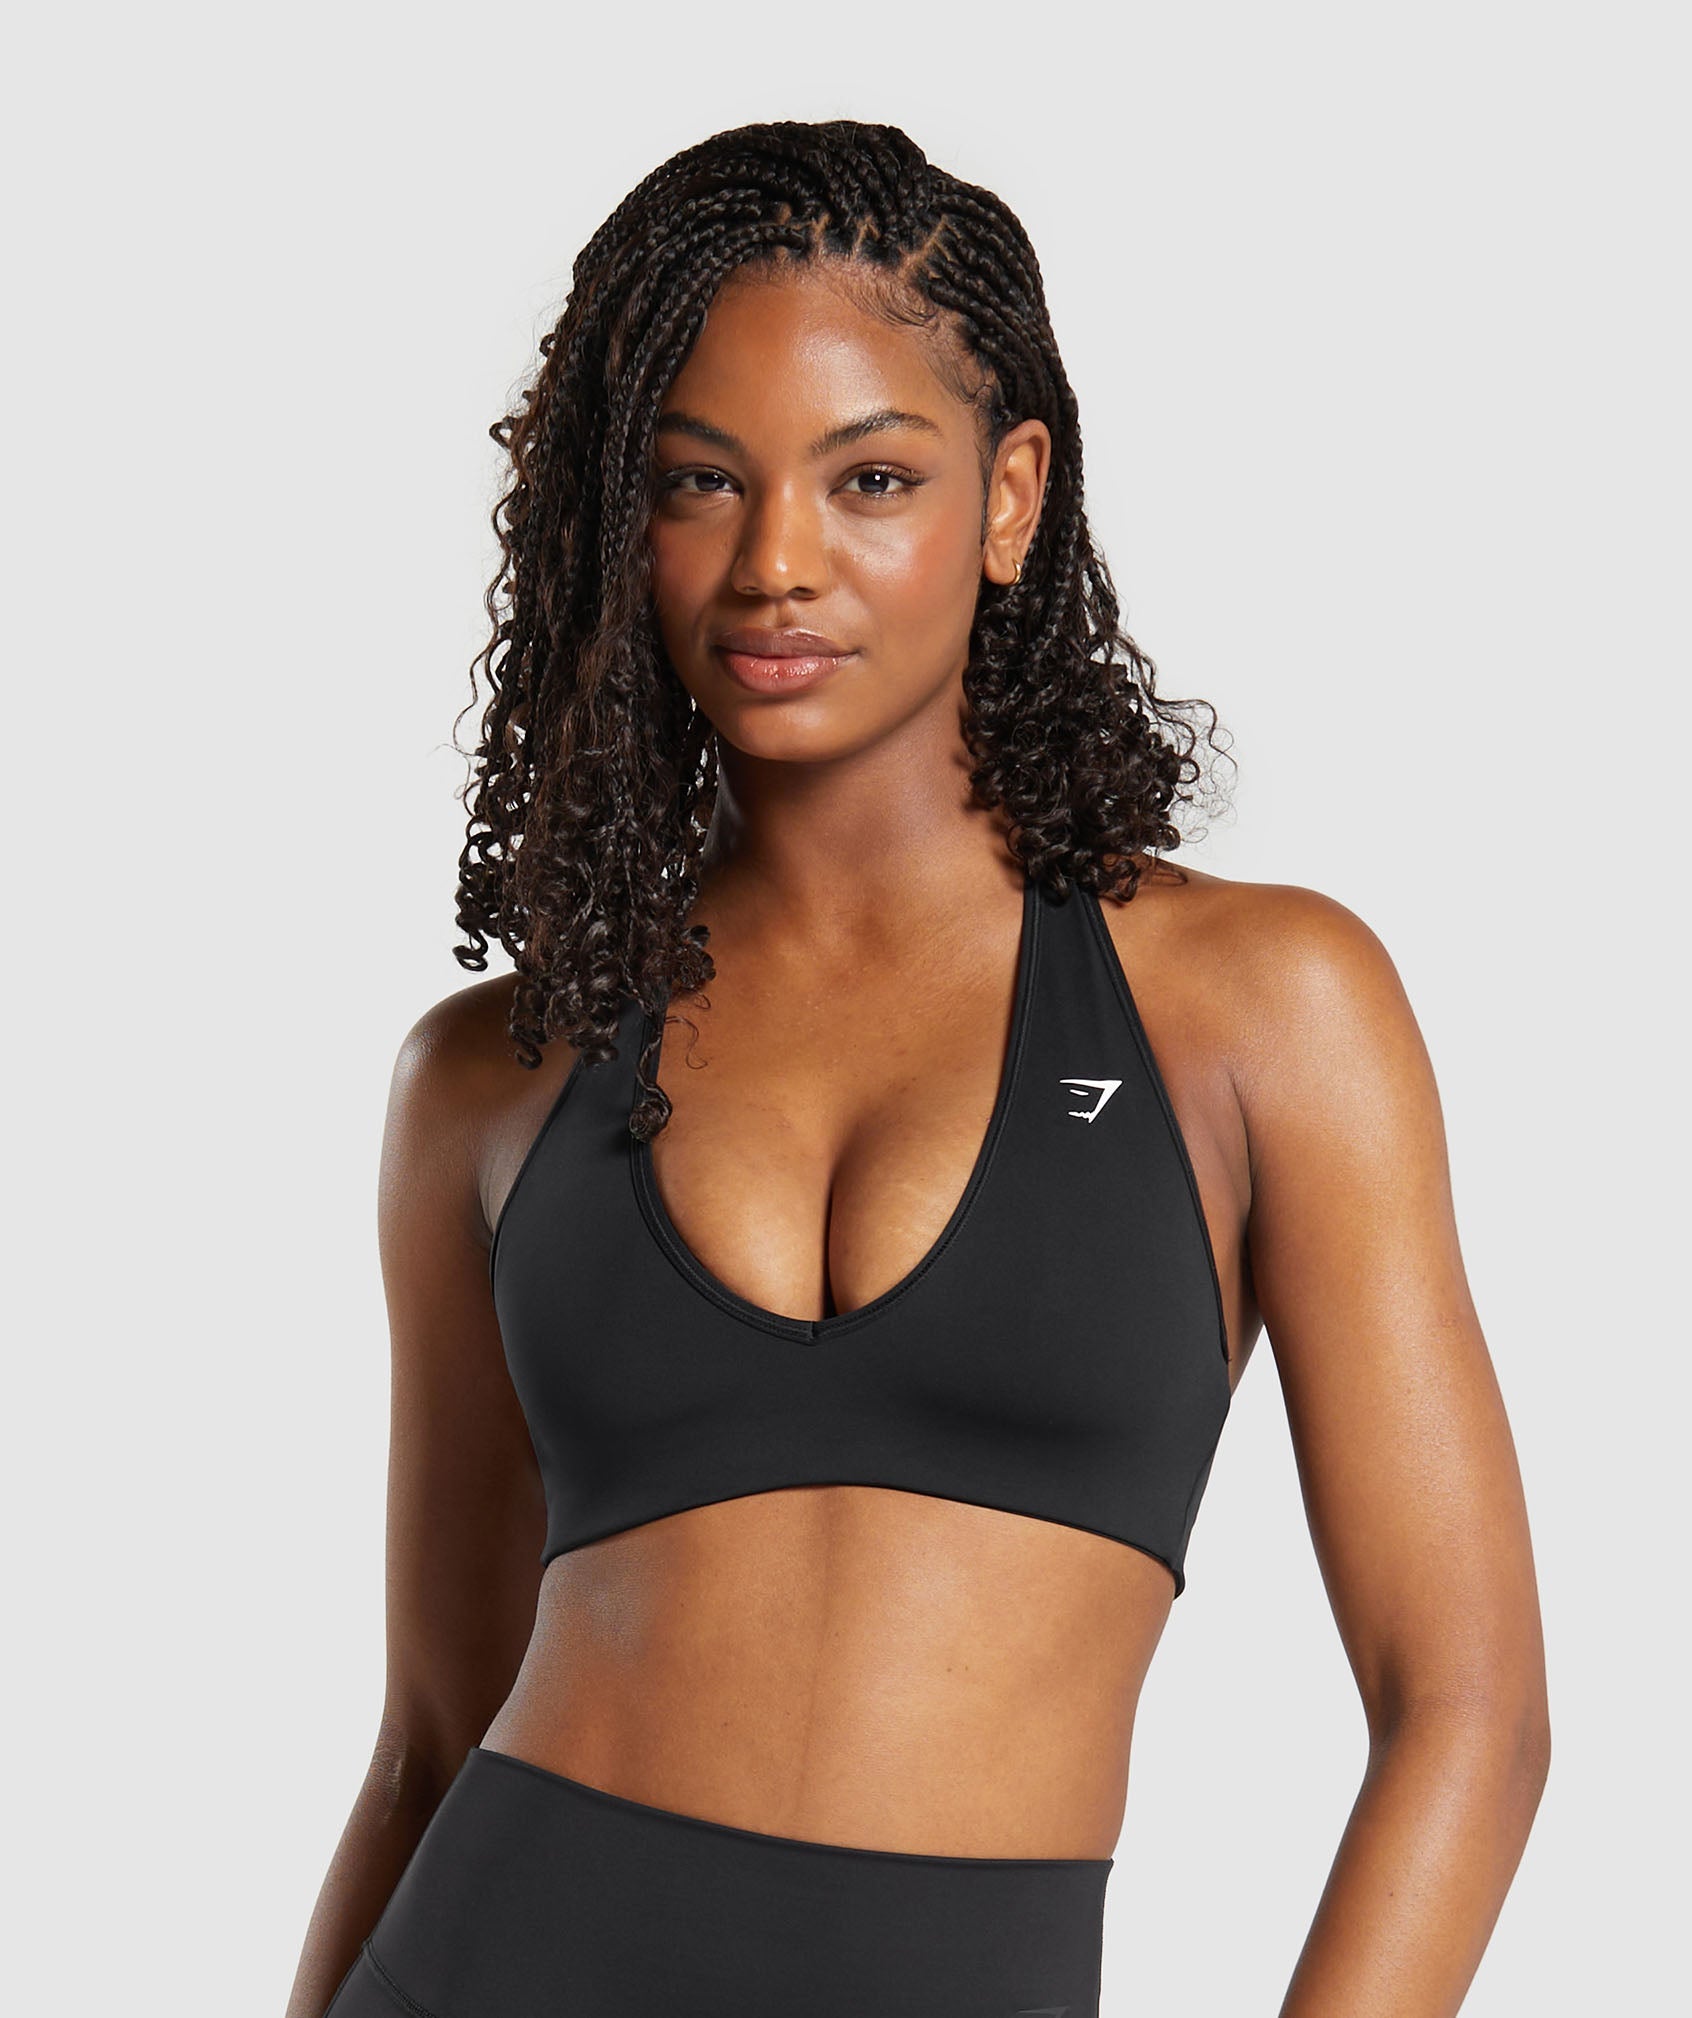 Why You Should Wear Sports Bra During Workouts?